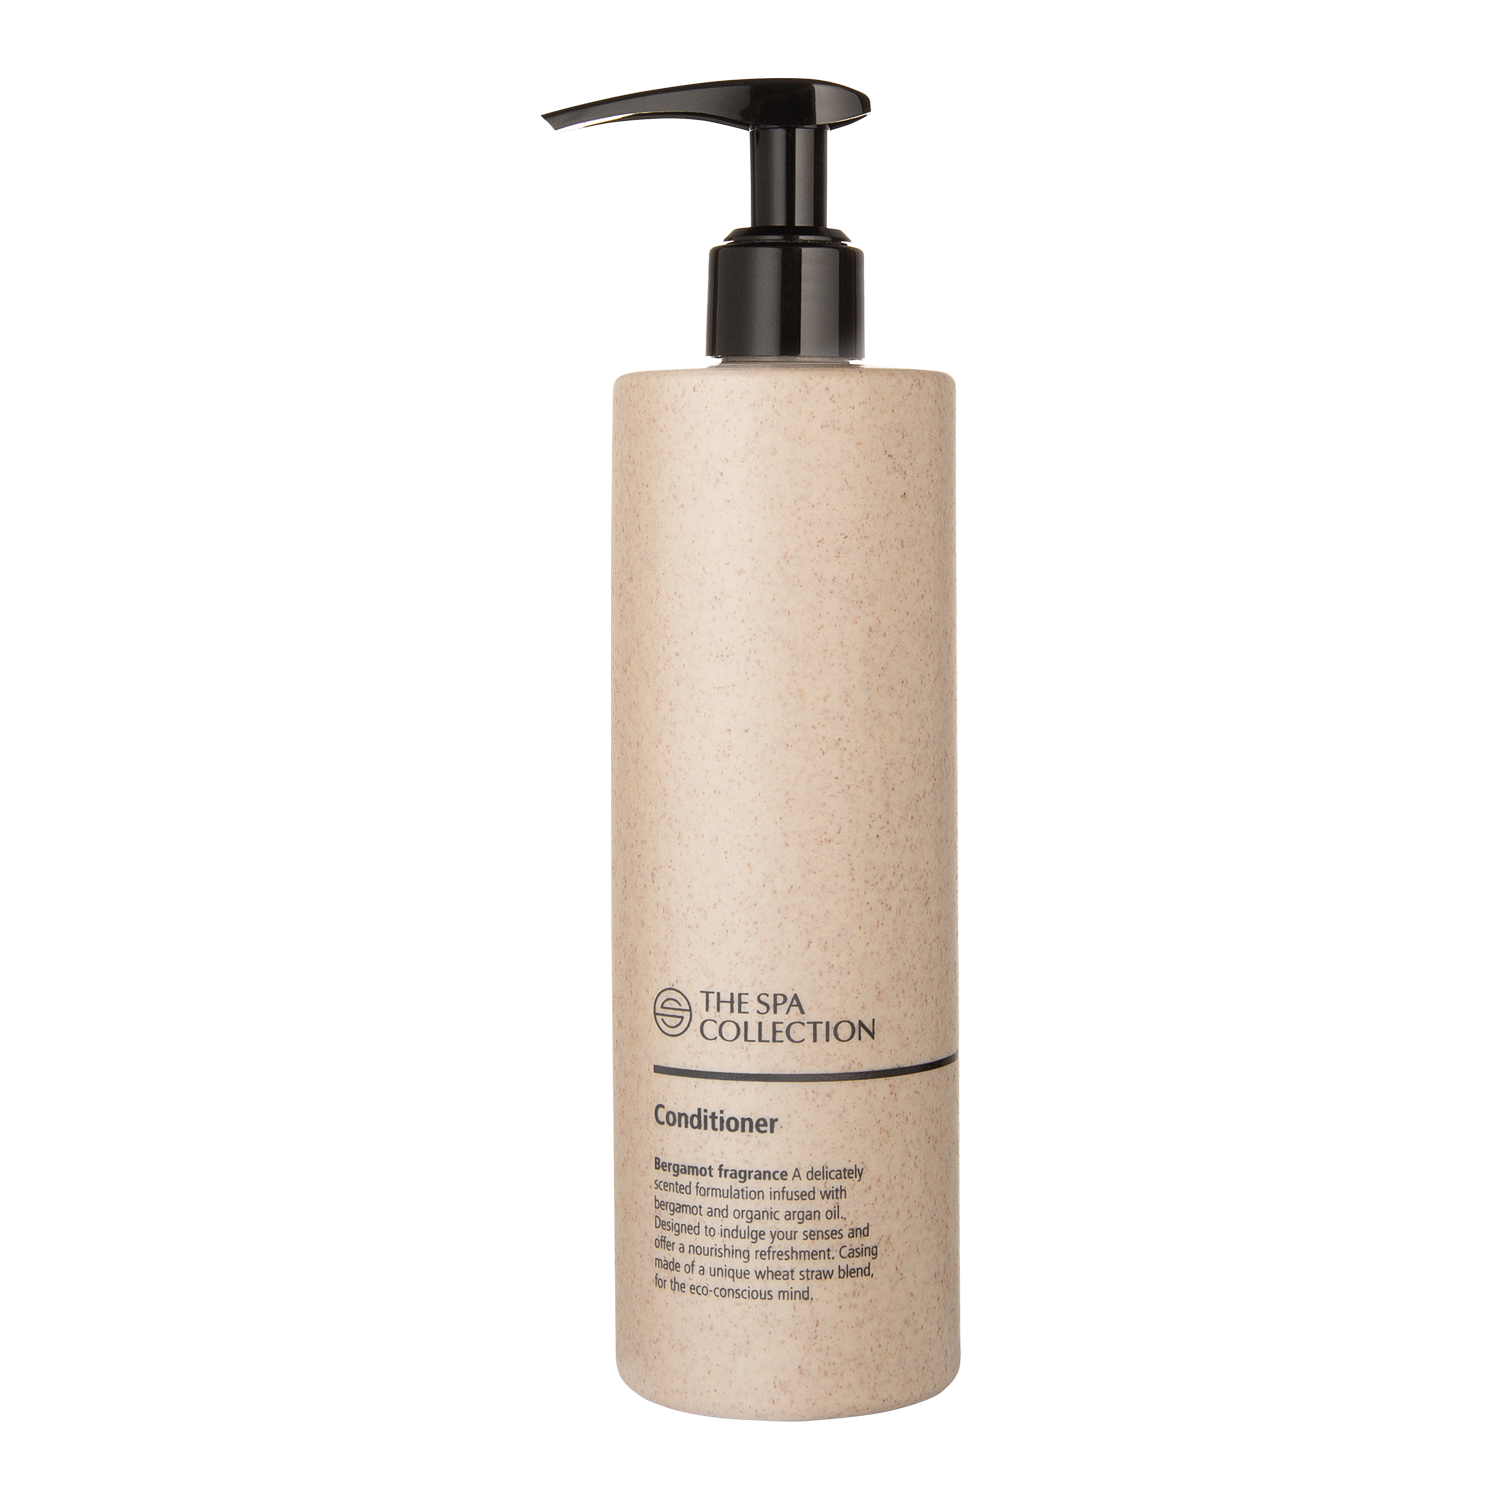 Eco-friendly conditioner with bergamot fragrance in recycled beige packaging with pump by The Spa Collection.